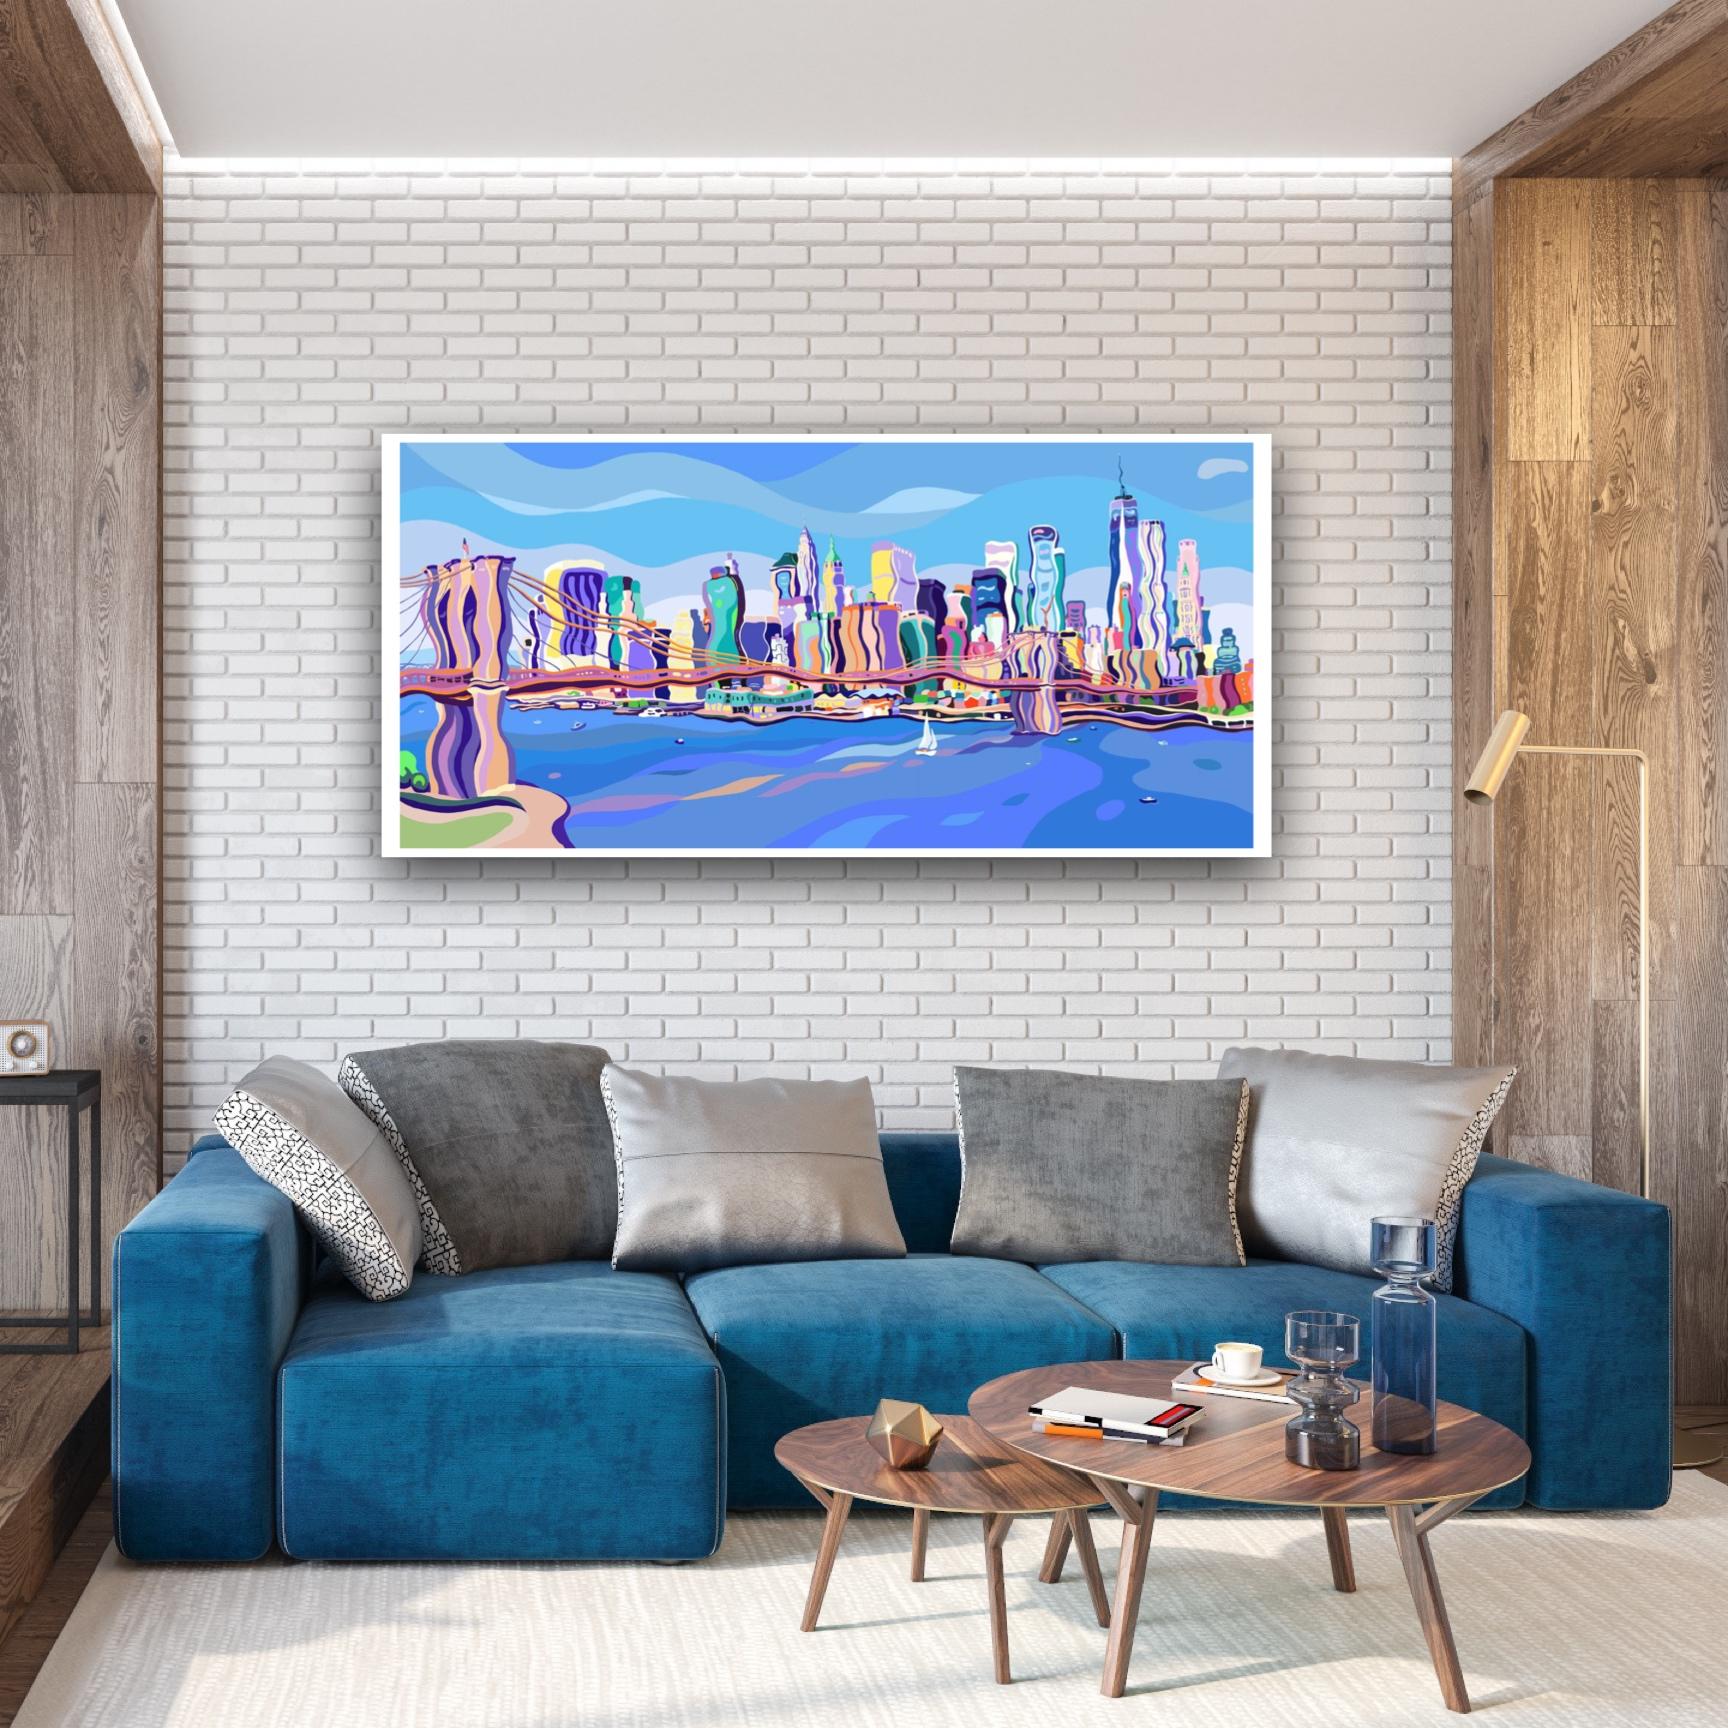 Inspired by Manhattan's Skyline

Sarah paints an original artwork freehand using professional drawing tools and a specialised tablet. A highly technical printing technique called dye sublimation is then used to print the artwork in HD on to